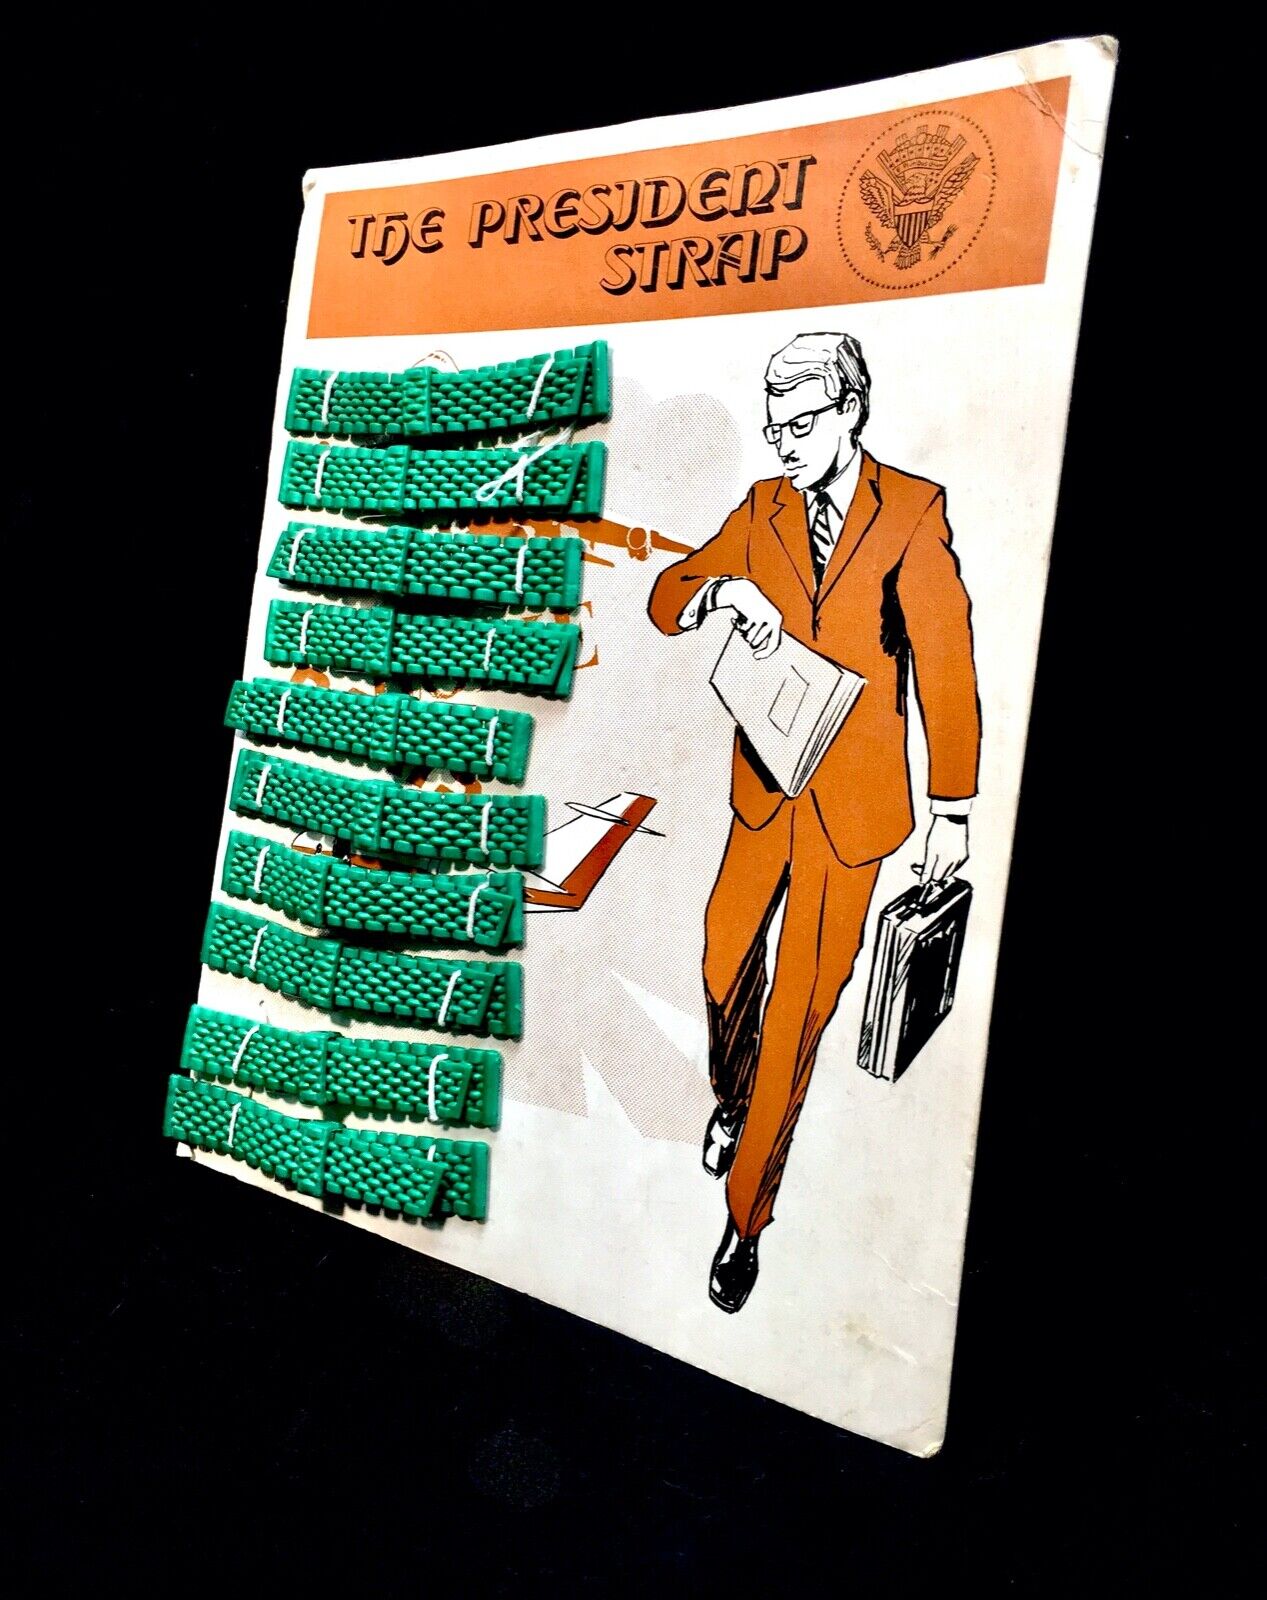 Vintage Advertising - Show Card for The President Green Watch Straps / Complete